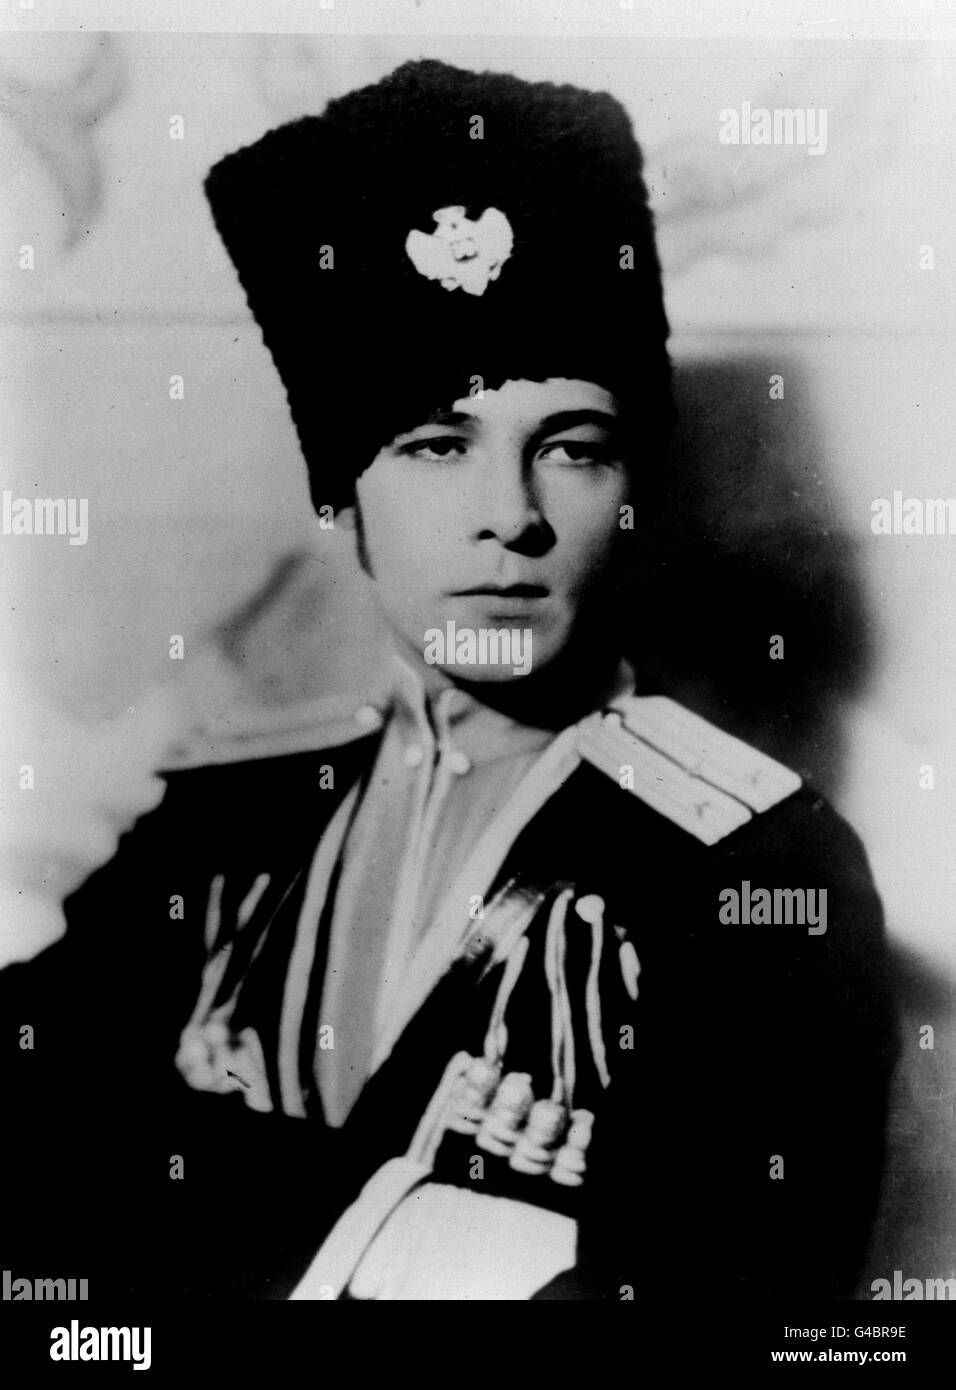 23RD AUGUST: On this day in 1926 Rudolph Valentino died of septicemia aged 31.  RUDOLPH VALENTINO Stock Photo